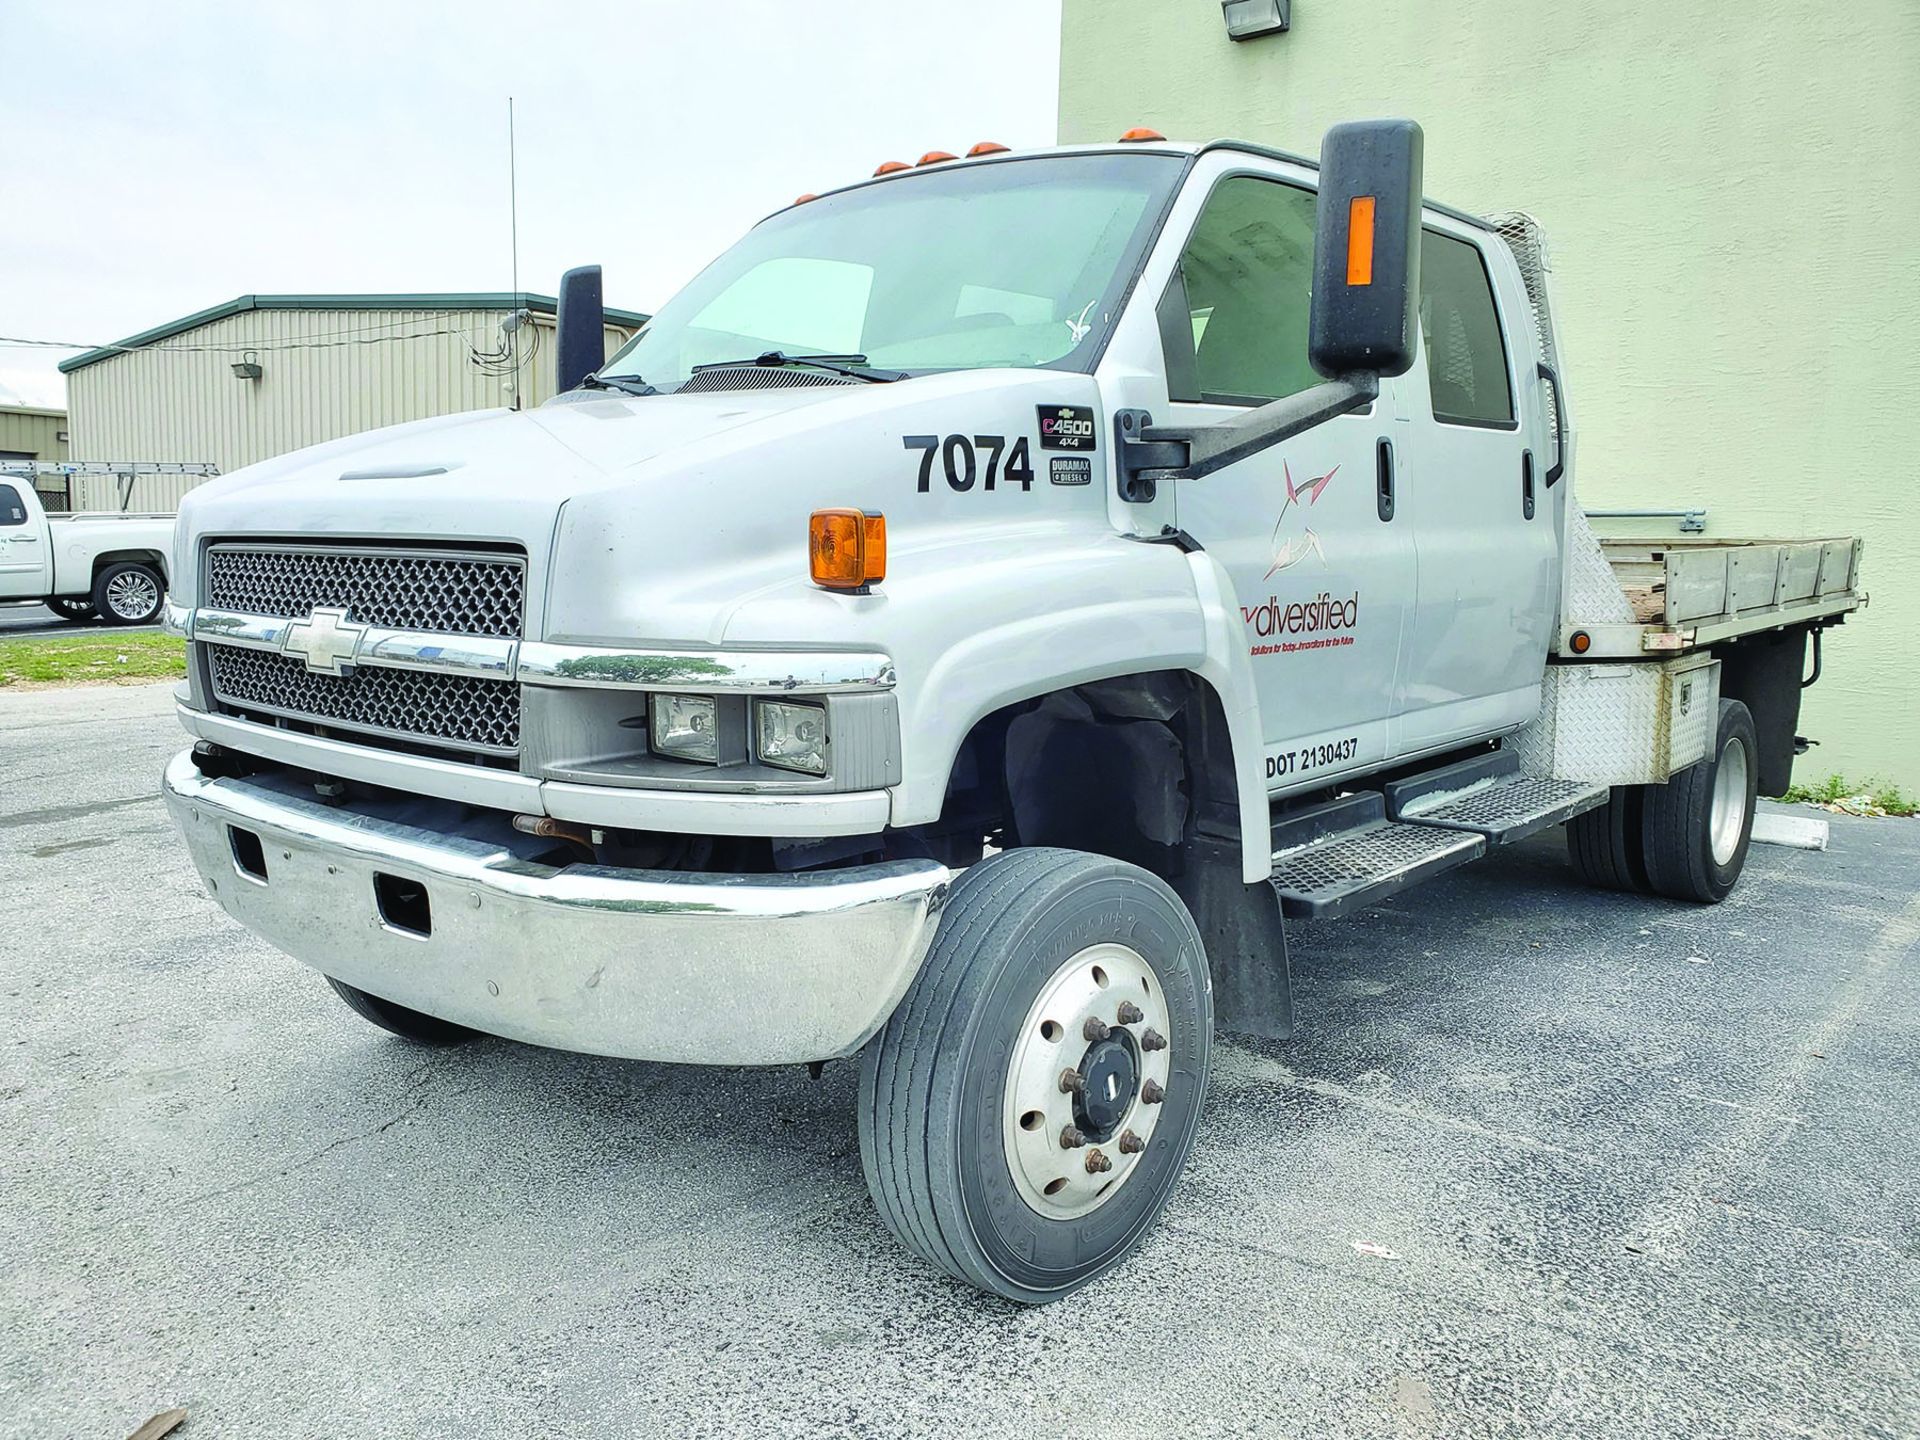 2006 CHEVROLET C4500 4X4 CREW CAB FLAT/STAKE BED TRUCK W/IMT 2015 TELESCOPING BOOM, 2.5 TON HOOK, - Image 14 of 19